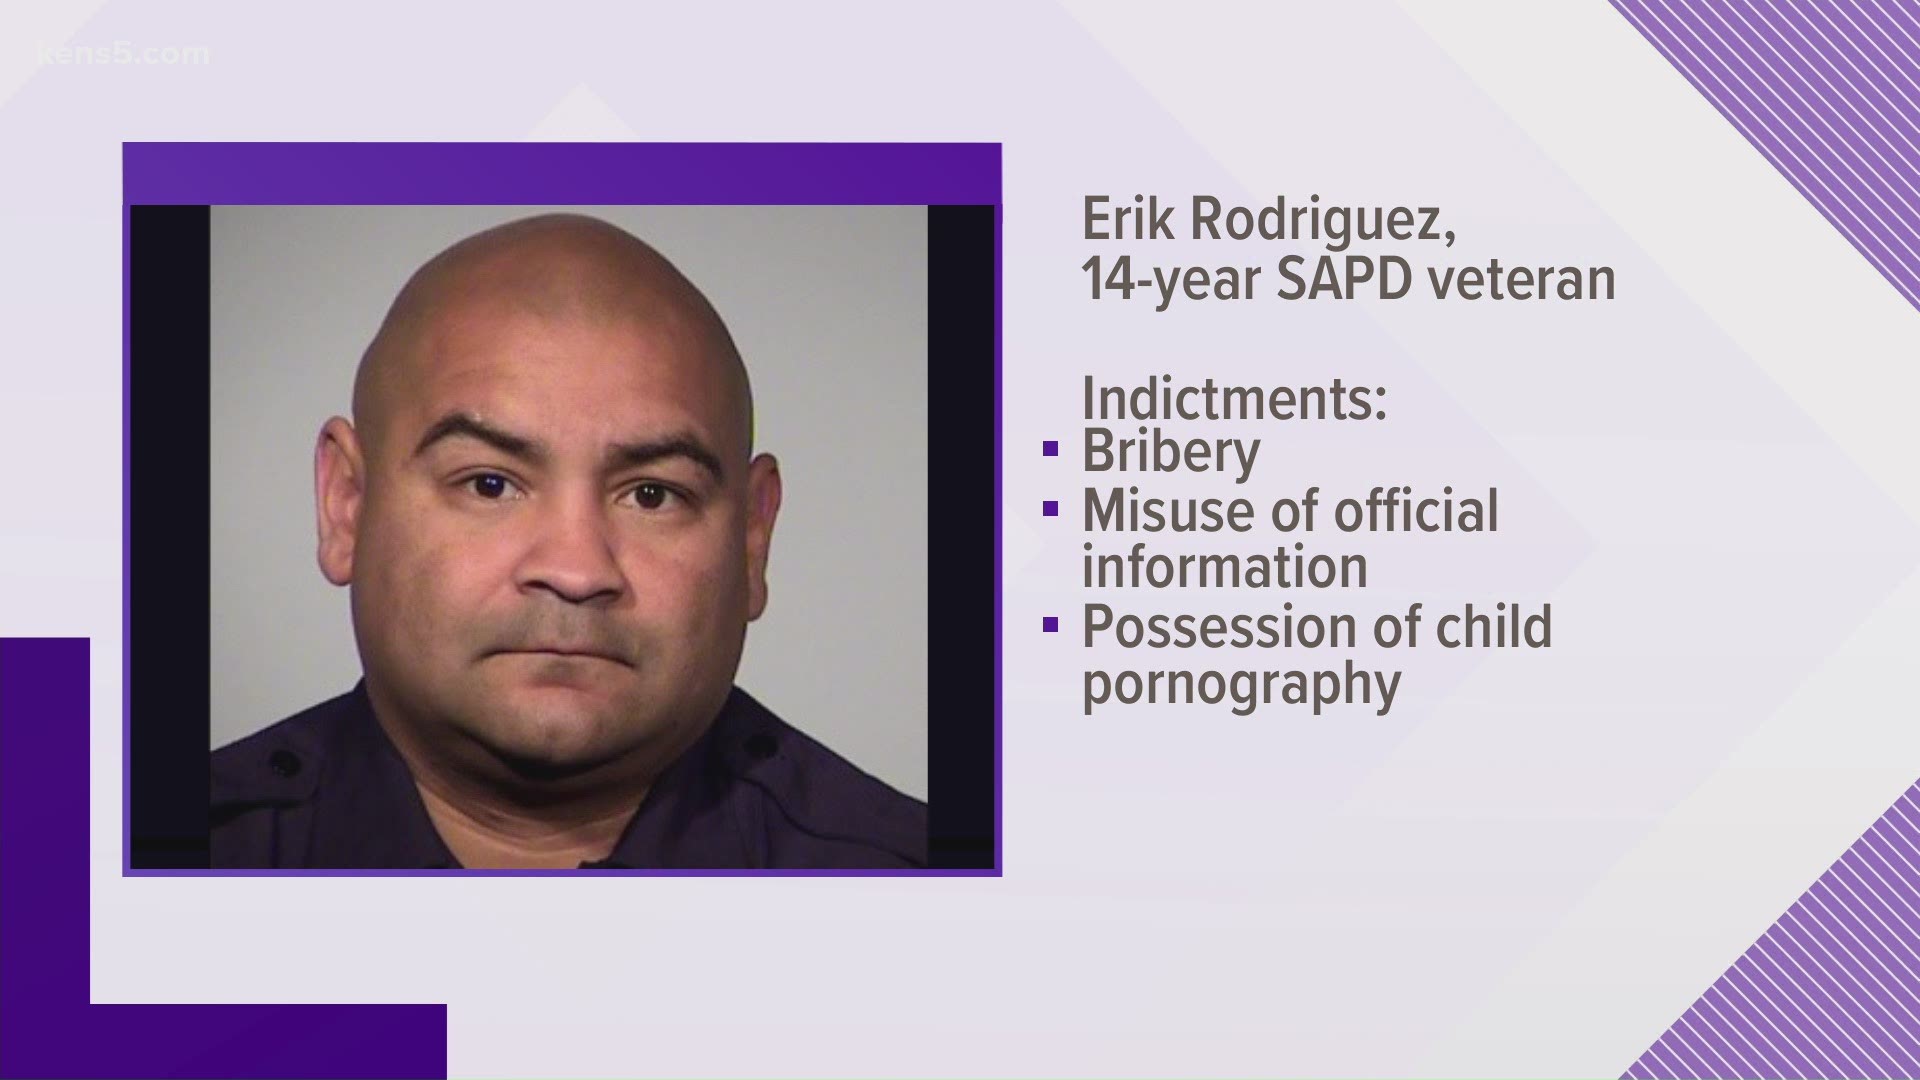 A grand jury indicted officer Erik Rodriguez, a 14-year SAPD veteran, on three charges – including possession of child pornography. His bond has been set at $100k.